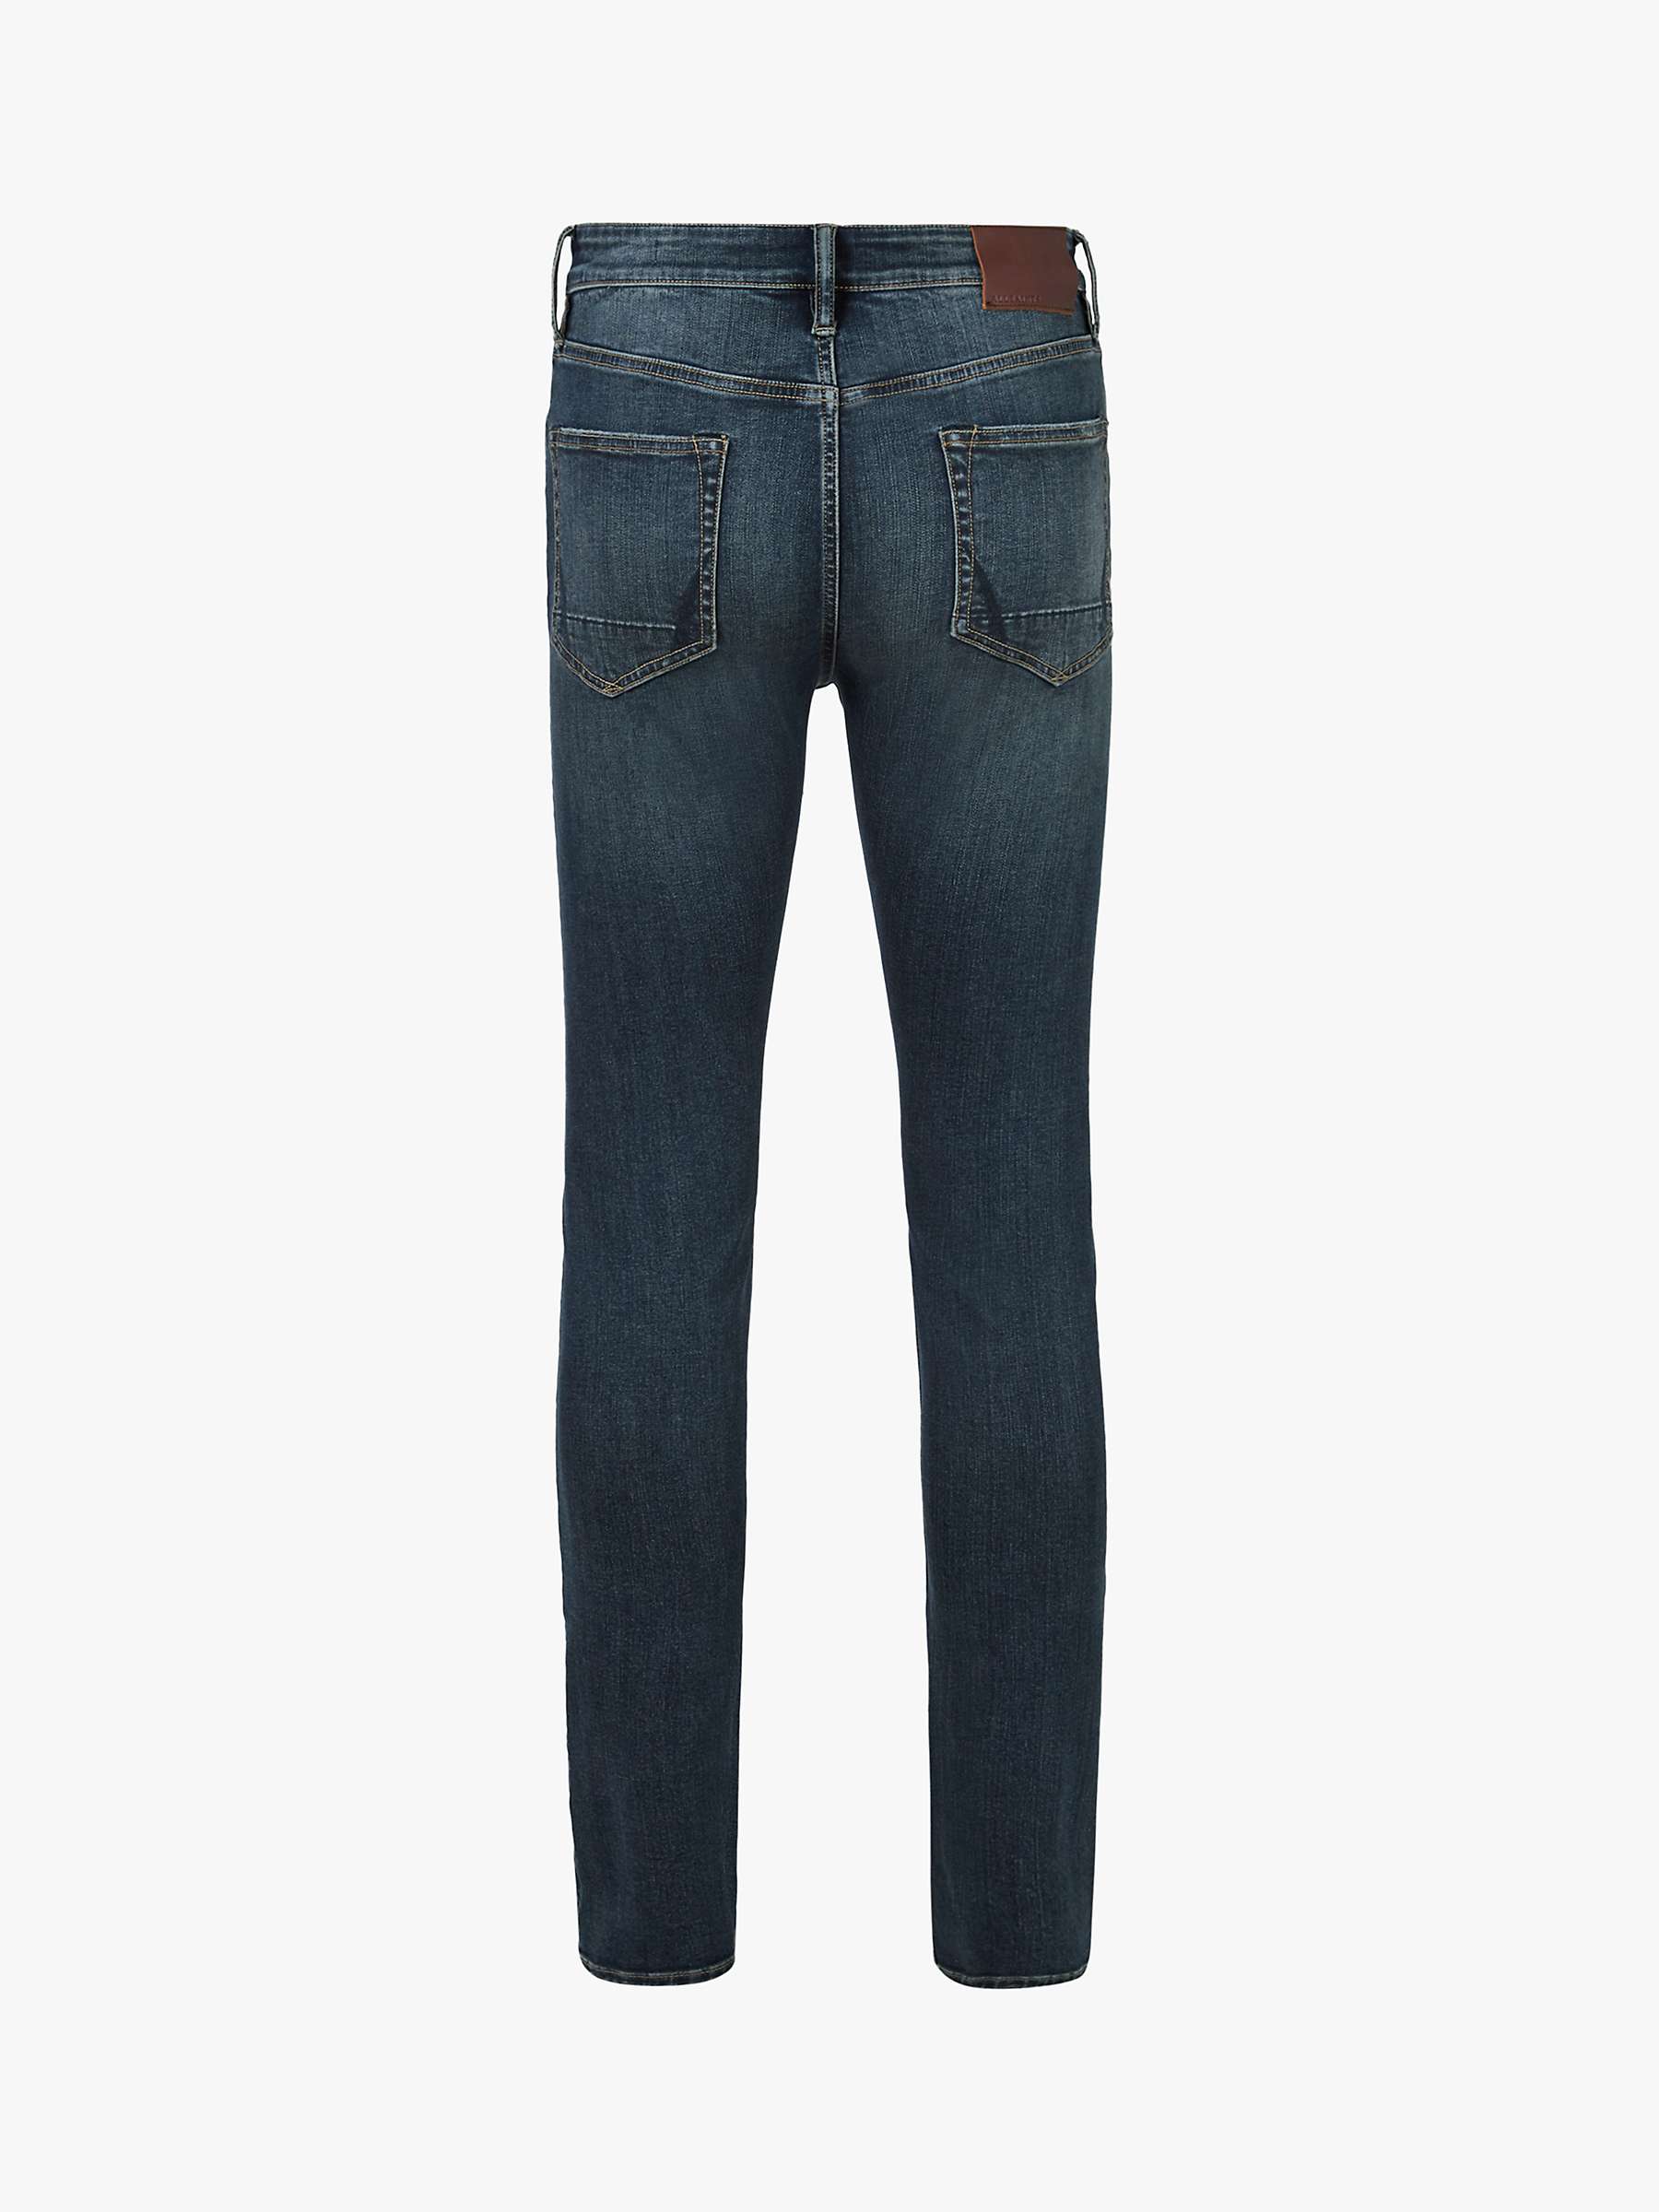 Buy AllSaints Ronnie Skinny Jeans Online at johnlewis.com